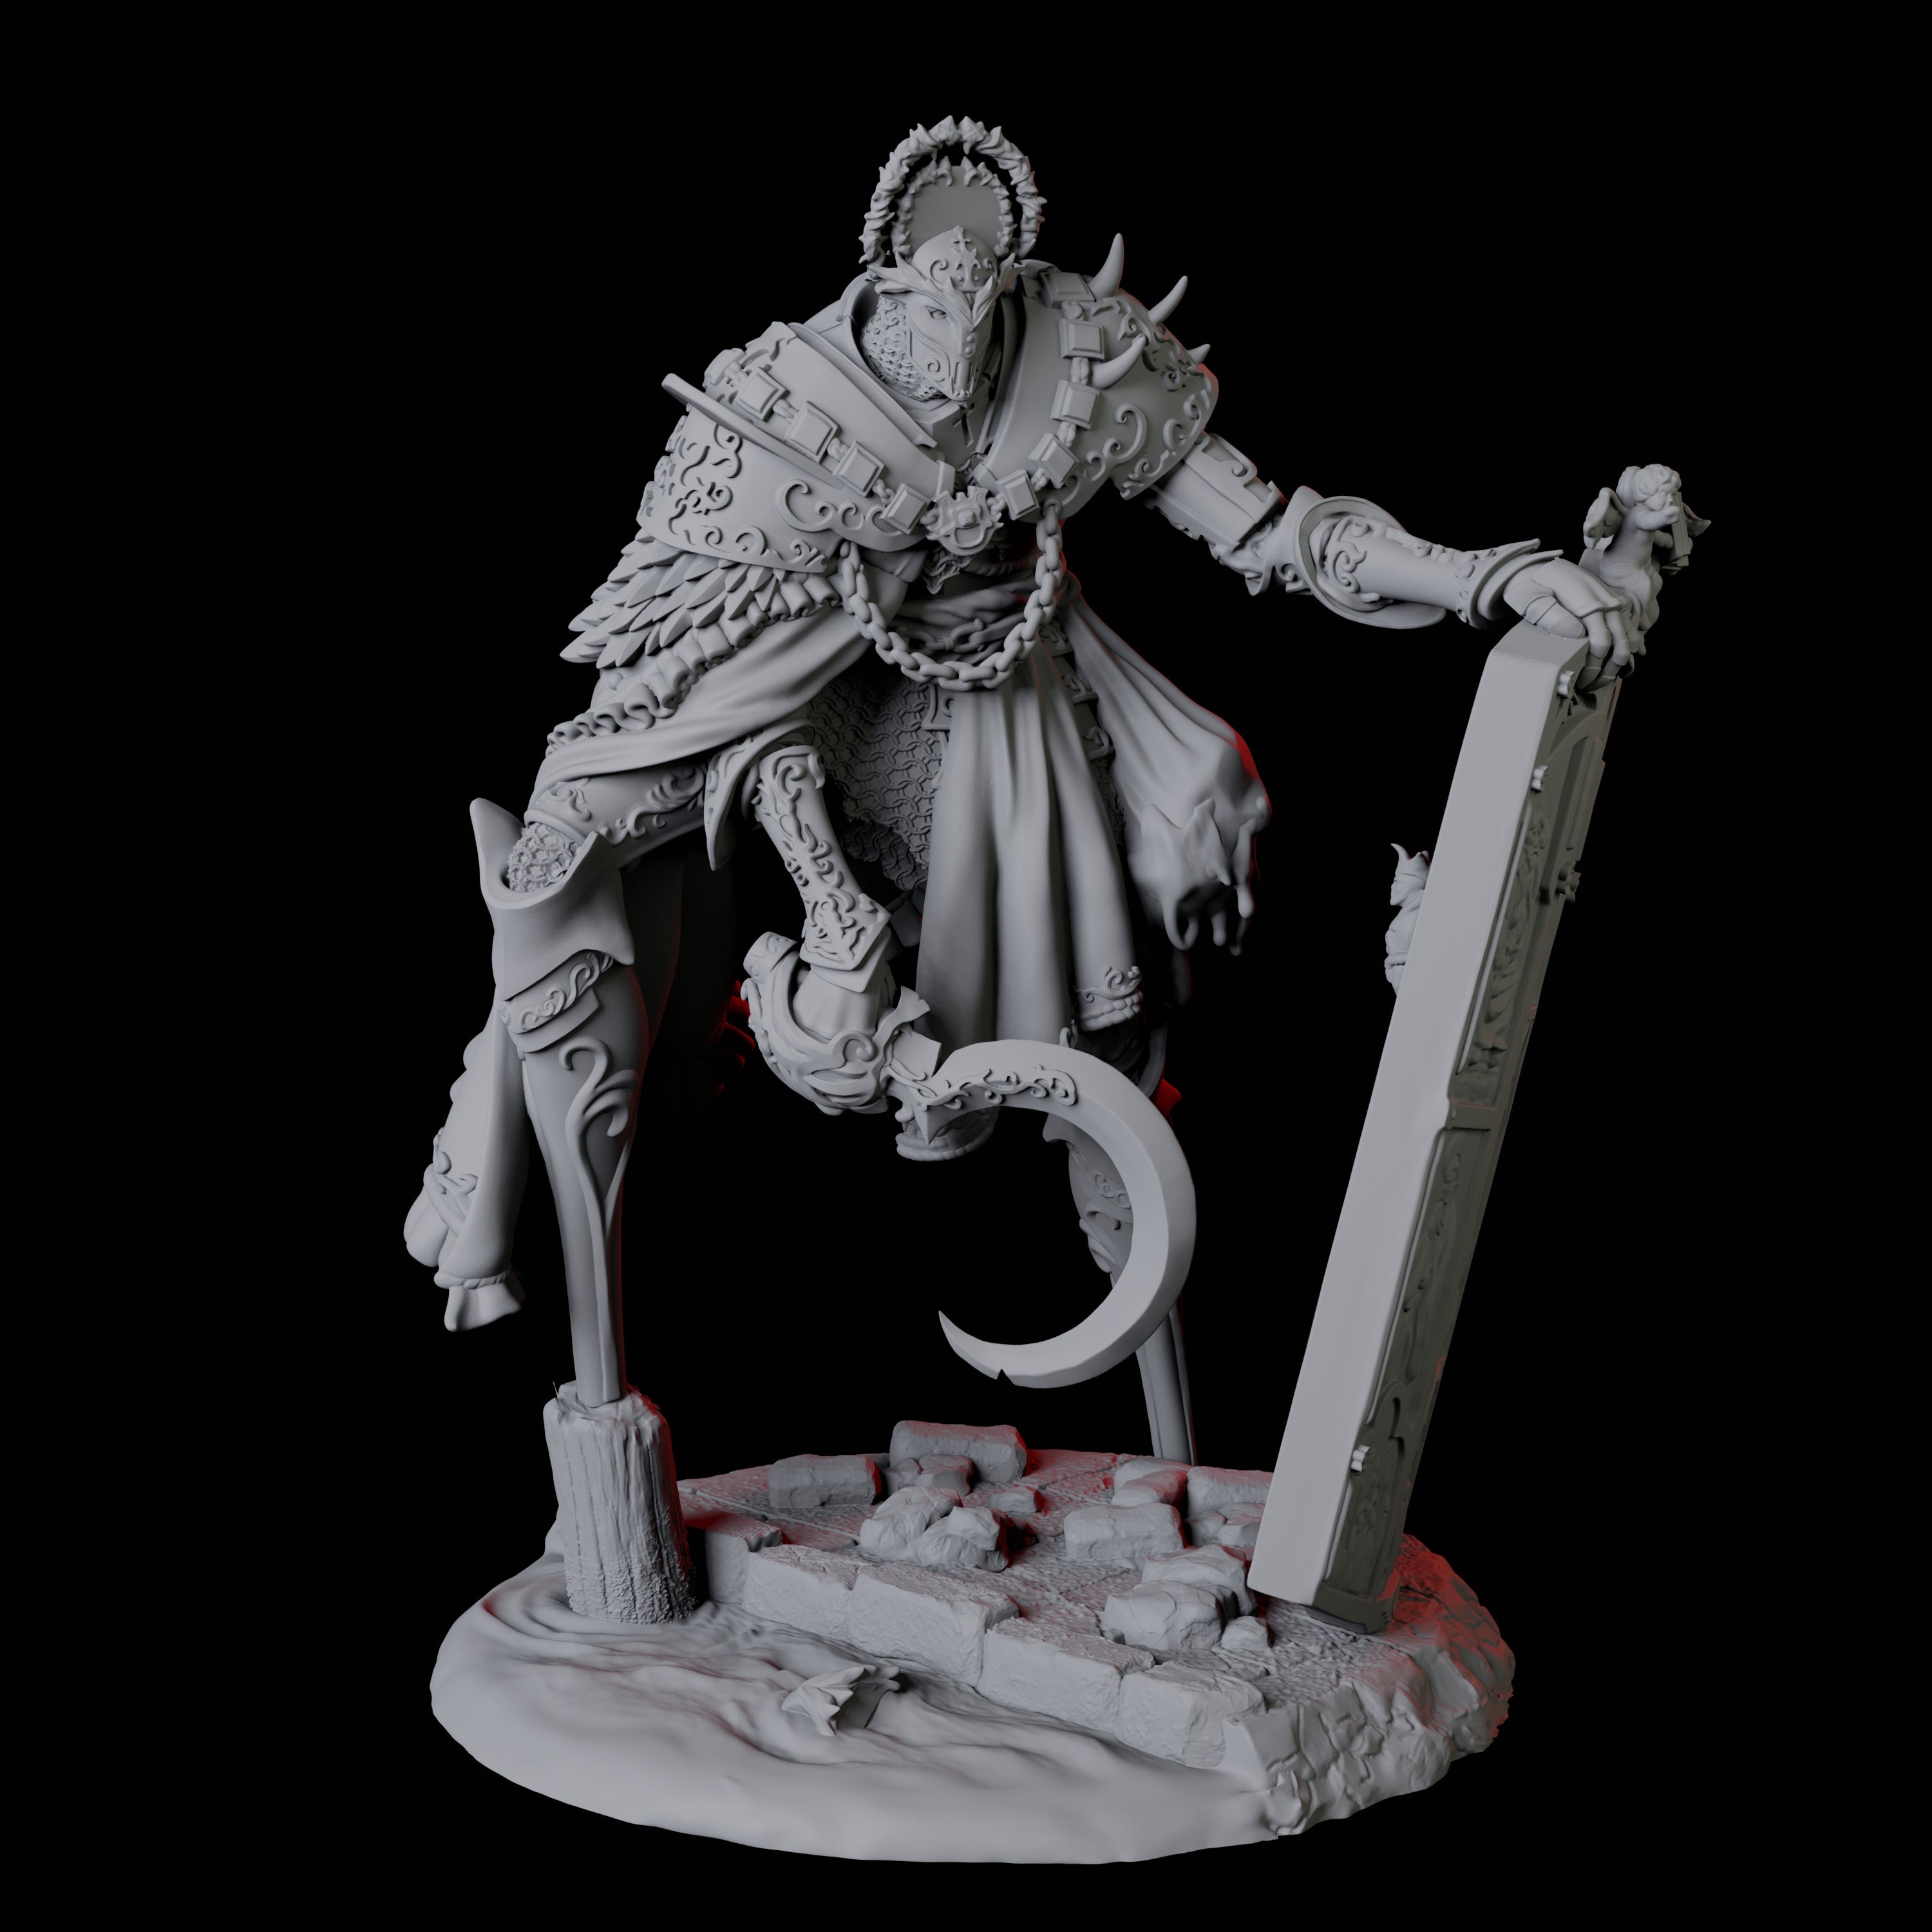 Four Guard Alchemical Golems Miniature for Dungeons and Dragons, Pathfinder or other TTRPGs